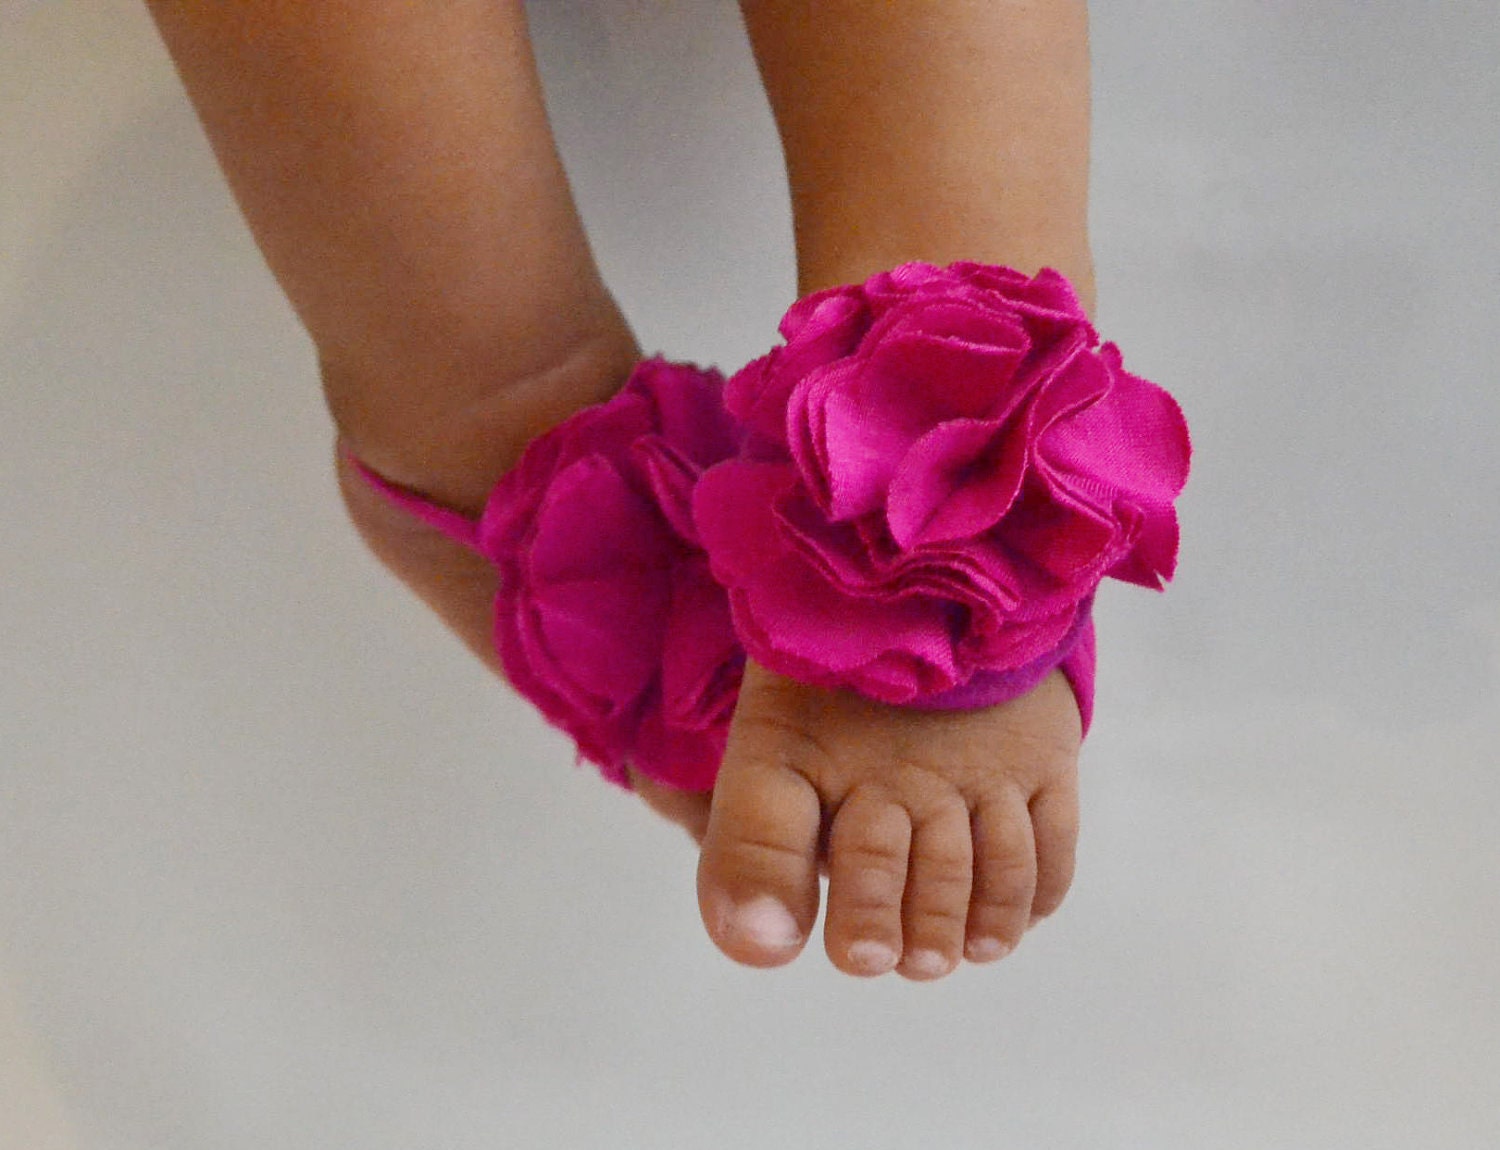 Items similar to Raspberry Baby barefoot sandals- baby sandals on Etsy